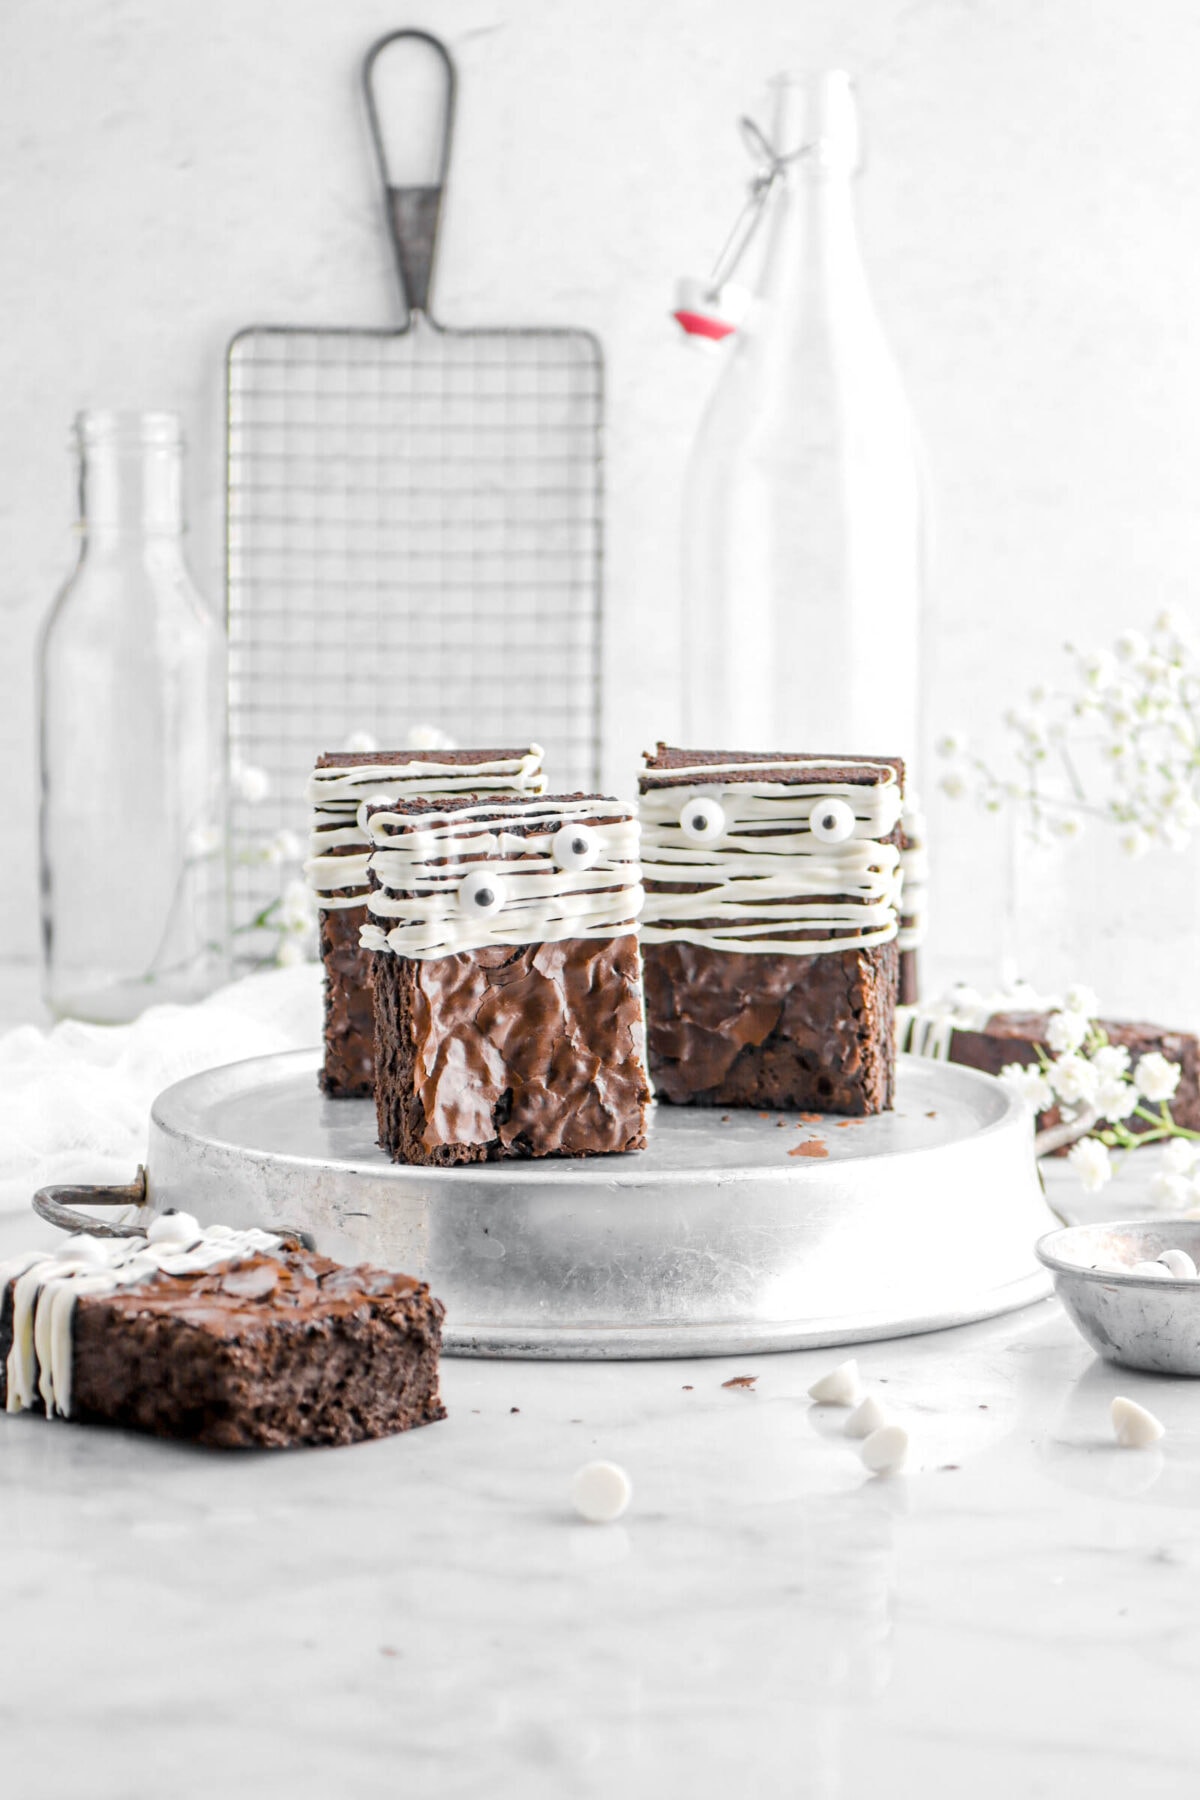 three brownies standing up right on pie plate with wire cooling rack, empty glasses, and flowers behind.